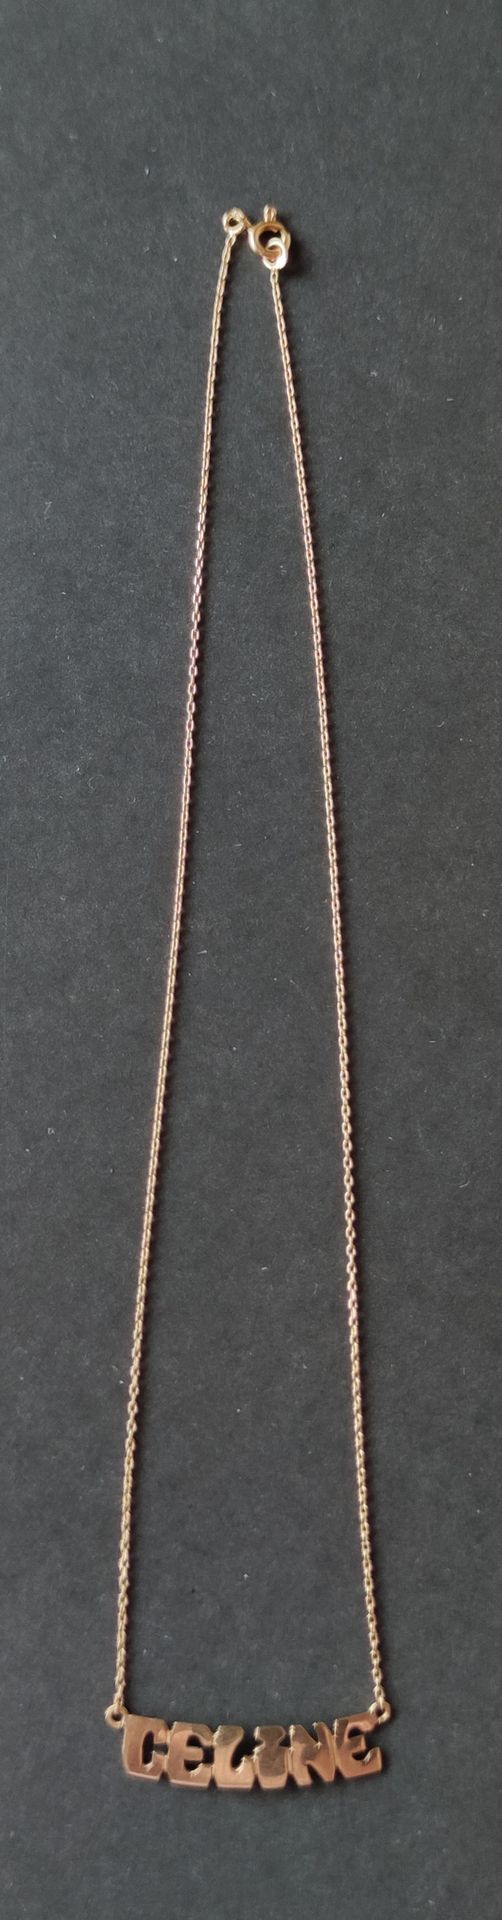 Null SMALL "celine" NECKLACE in yellow gold Weight : 2.7 g